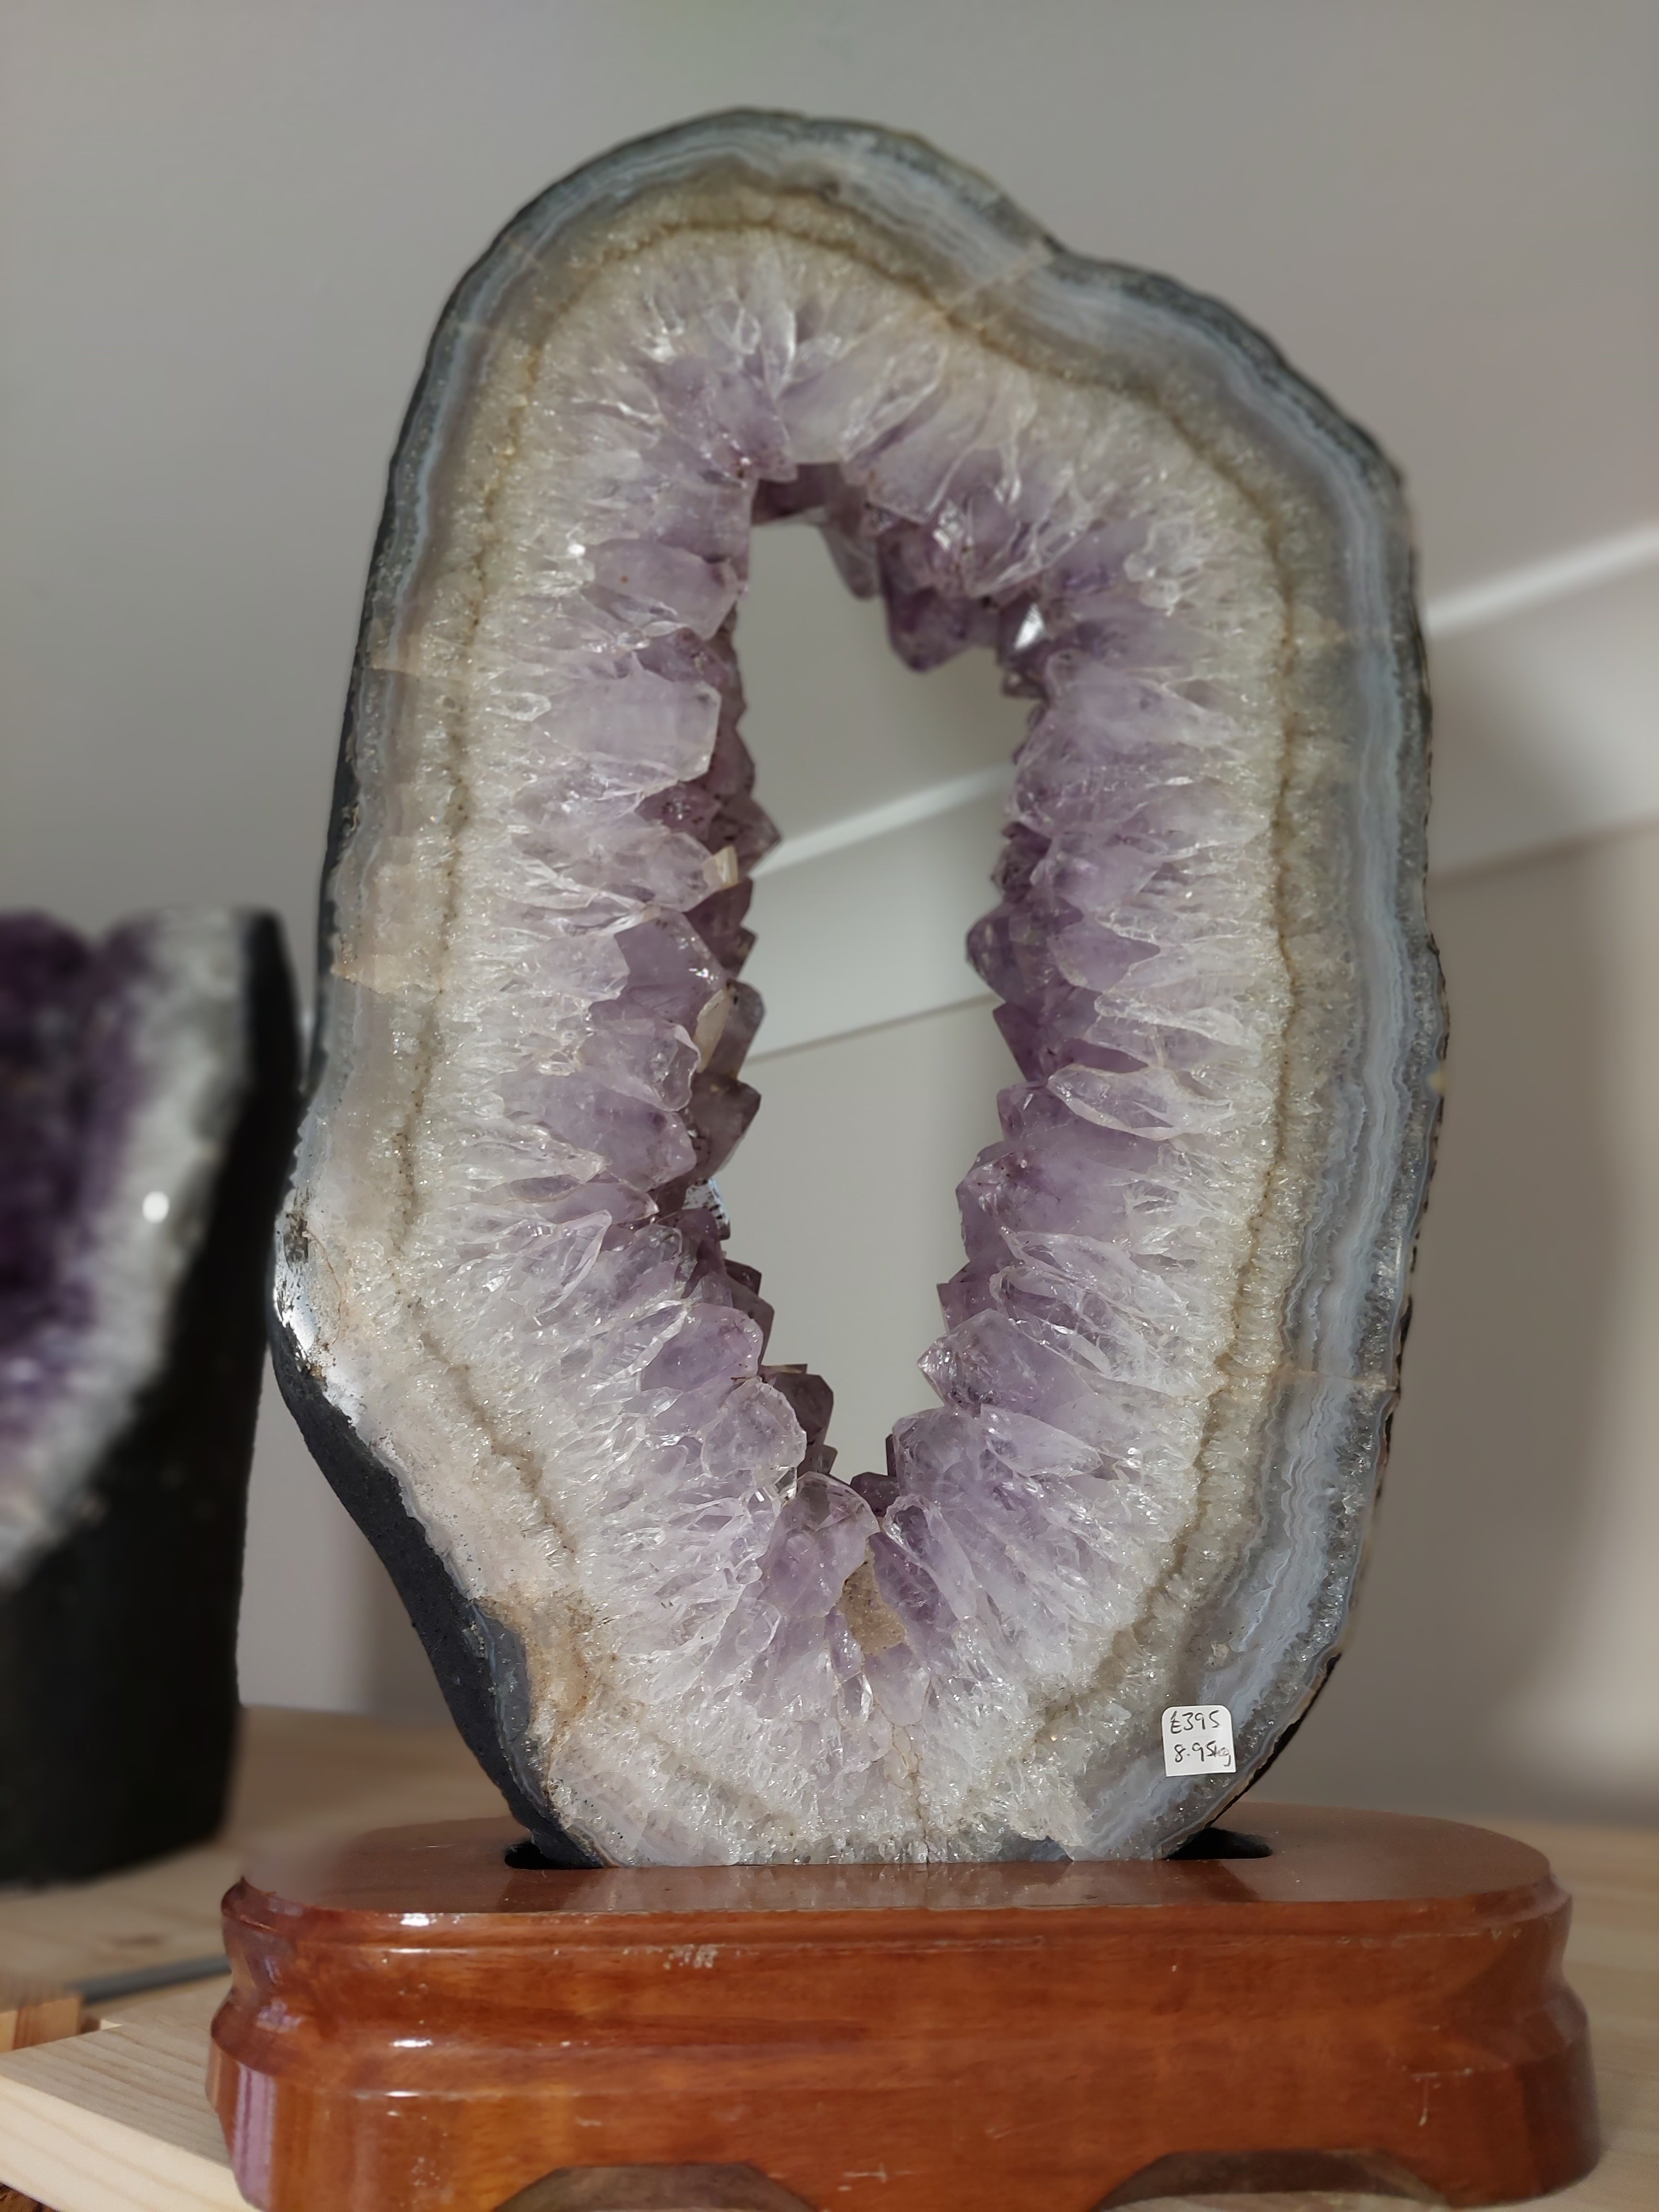 Amethyst and Agate Portal Slice Geode with Wooden Stand